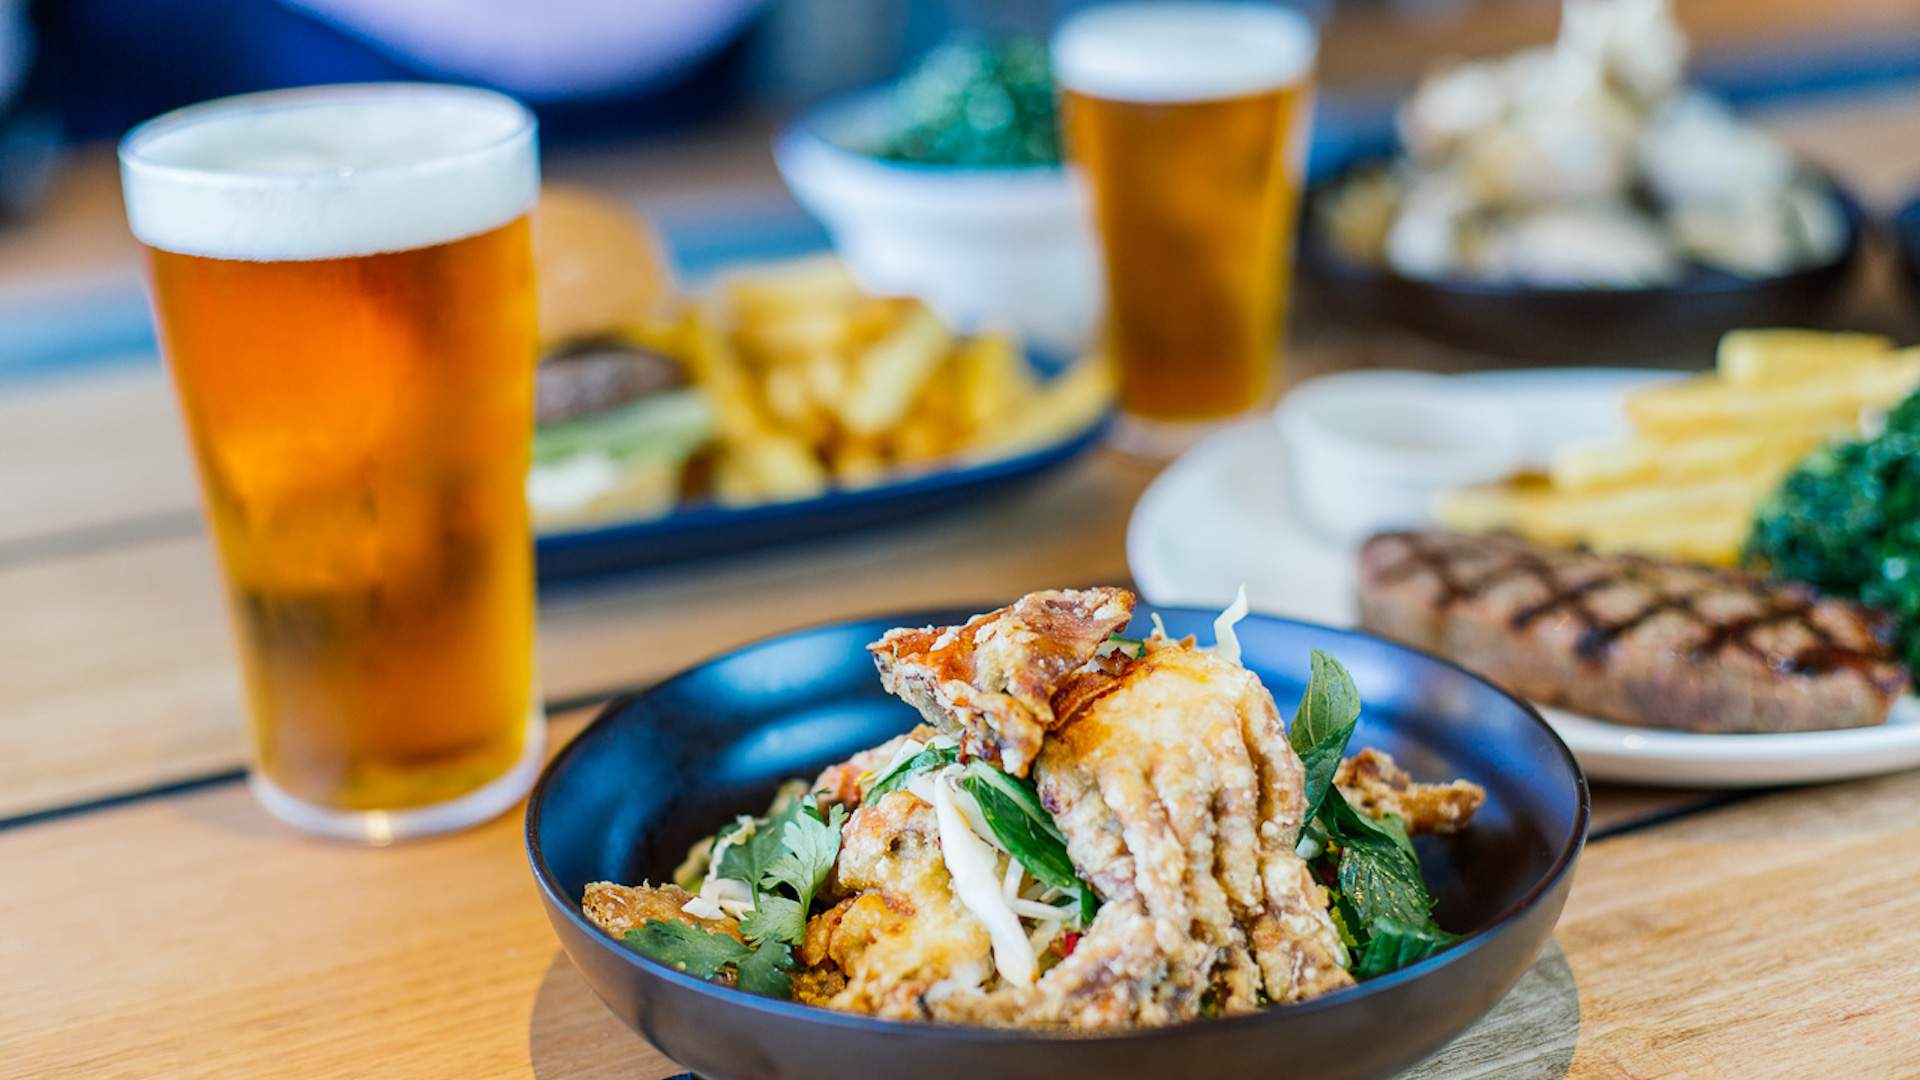 Sydney Just Scored Itself a New Pub with an On-Site Microbrewery